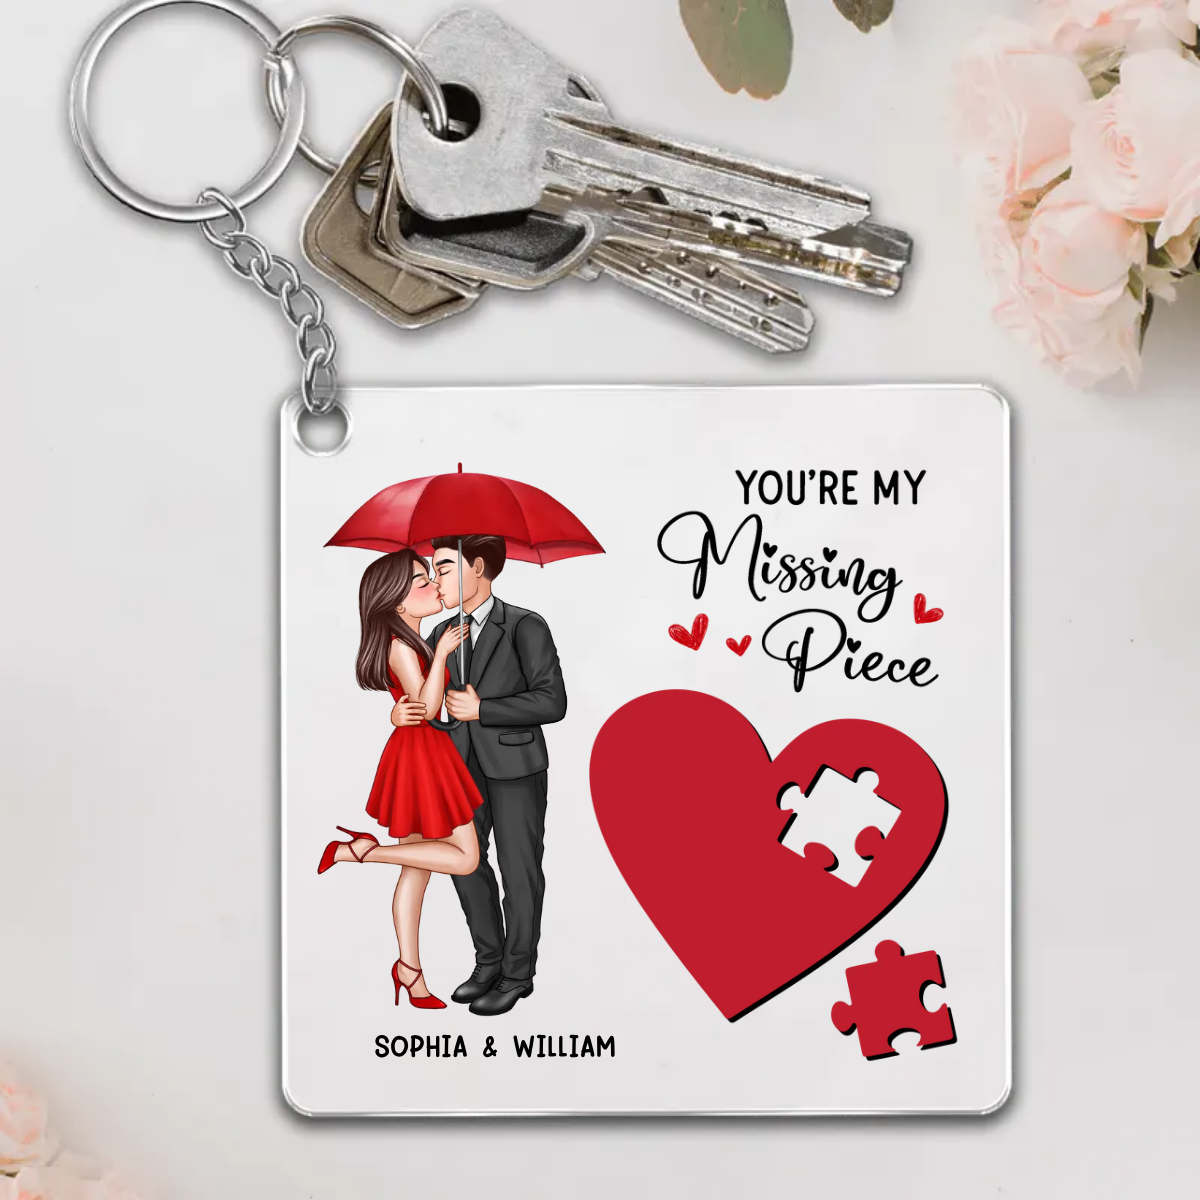 Elegant Couple Missing Piece Red Heart Valentine‘s Day Gift For Her Gift For Him Personalized Acrylic Keychain